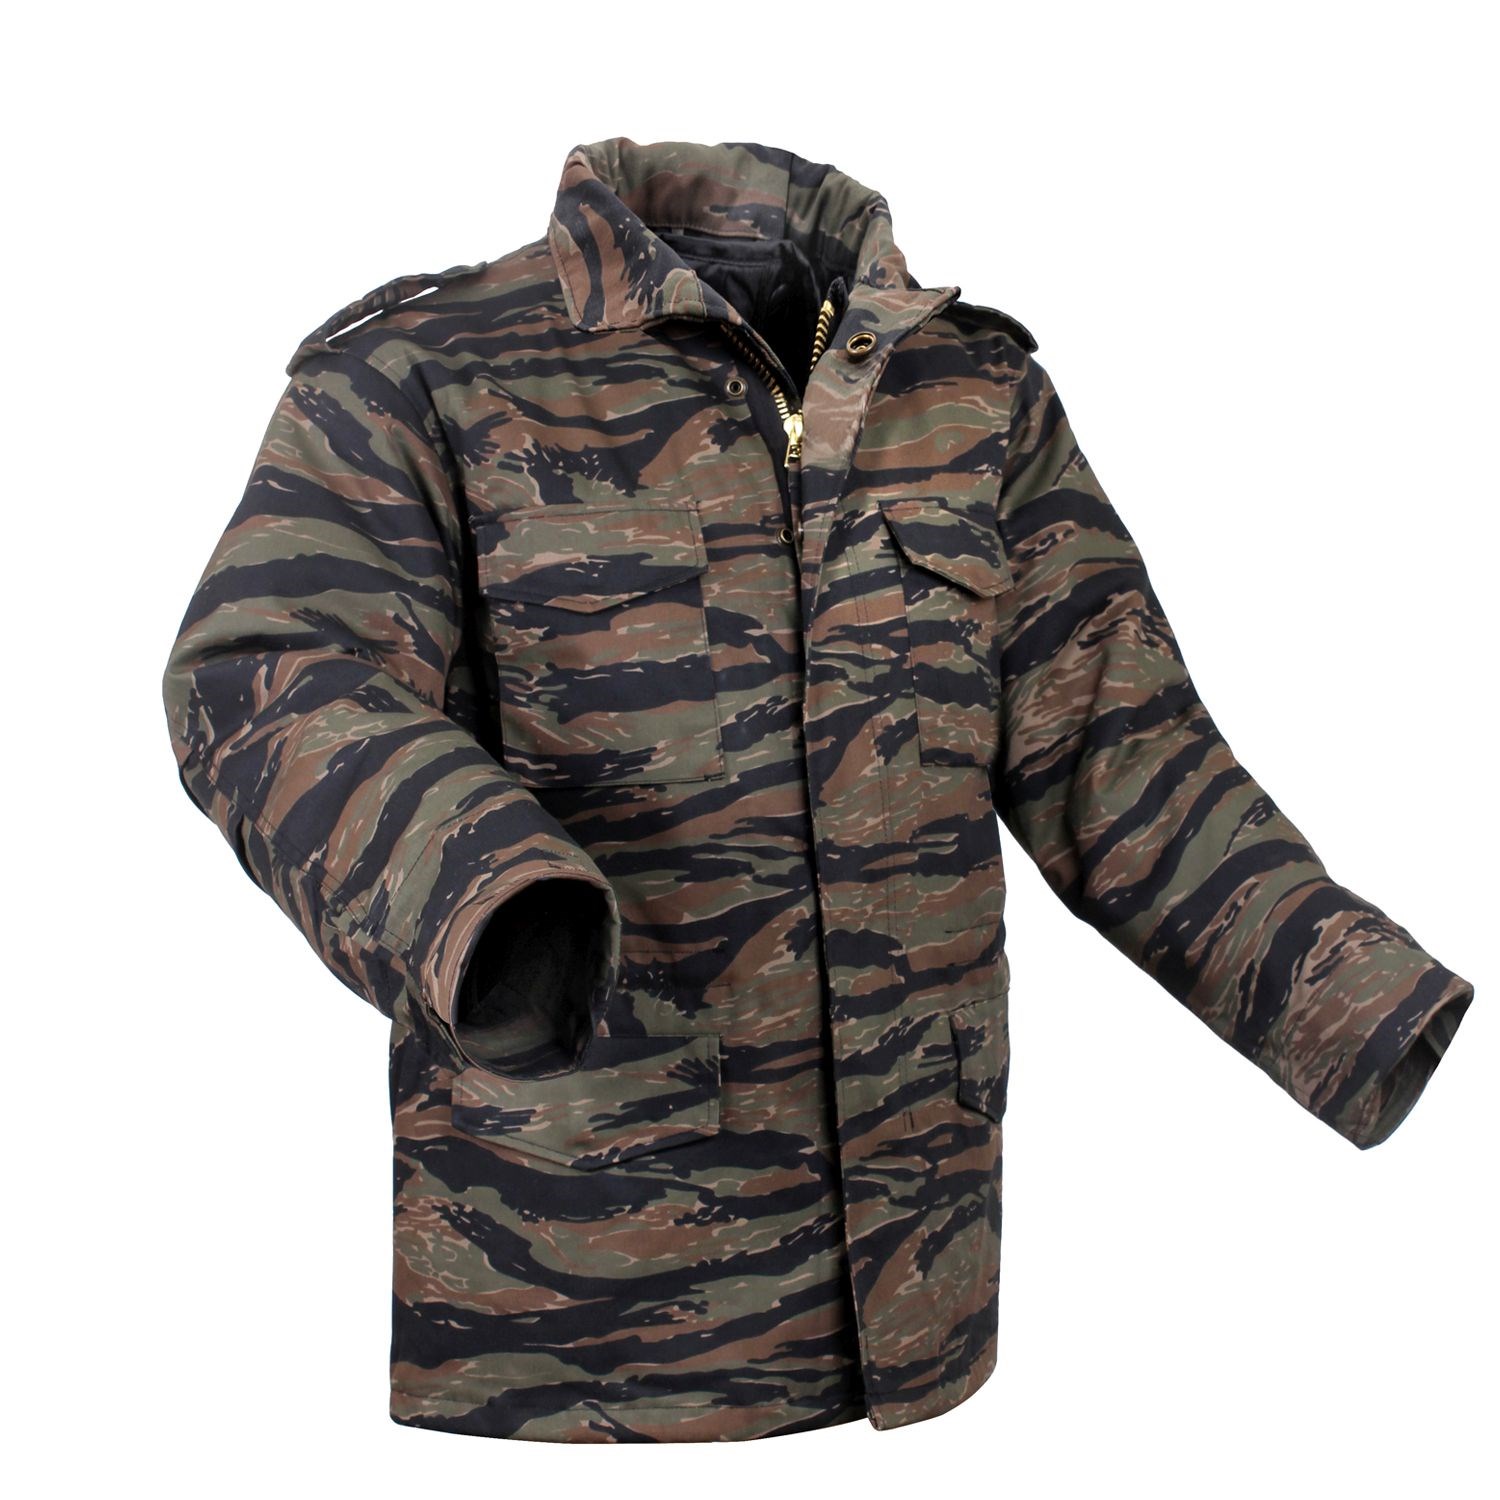 M-65 TIGER STRIPE jacket with the liner ROTHCO 8713 L-11